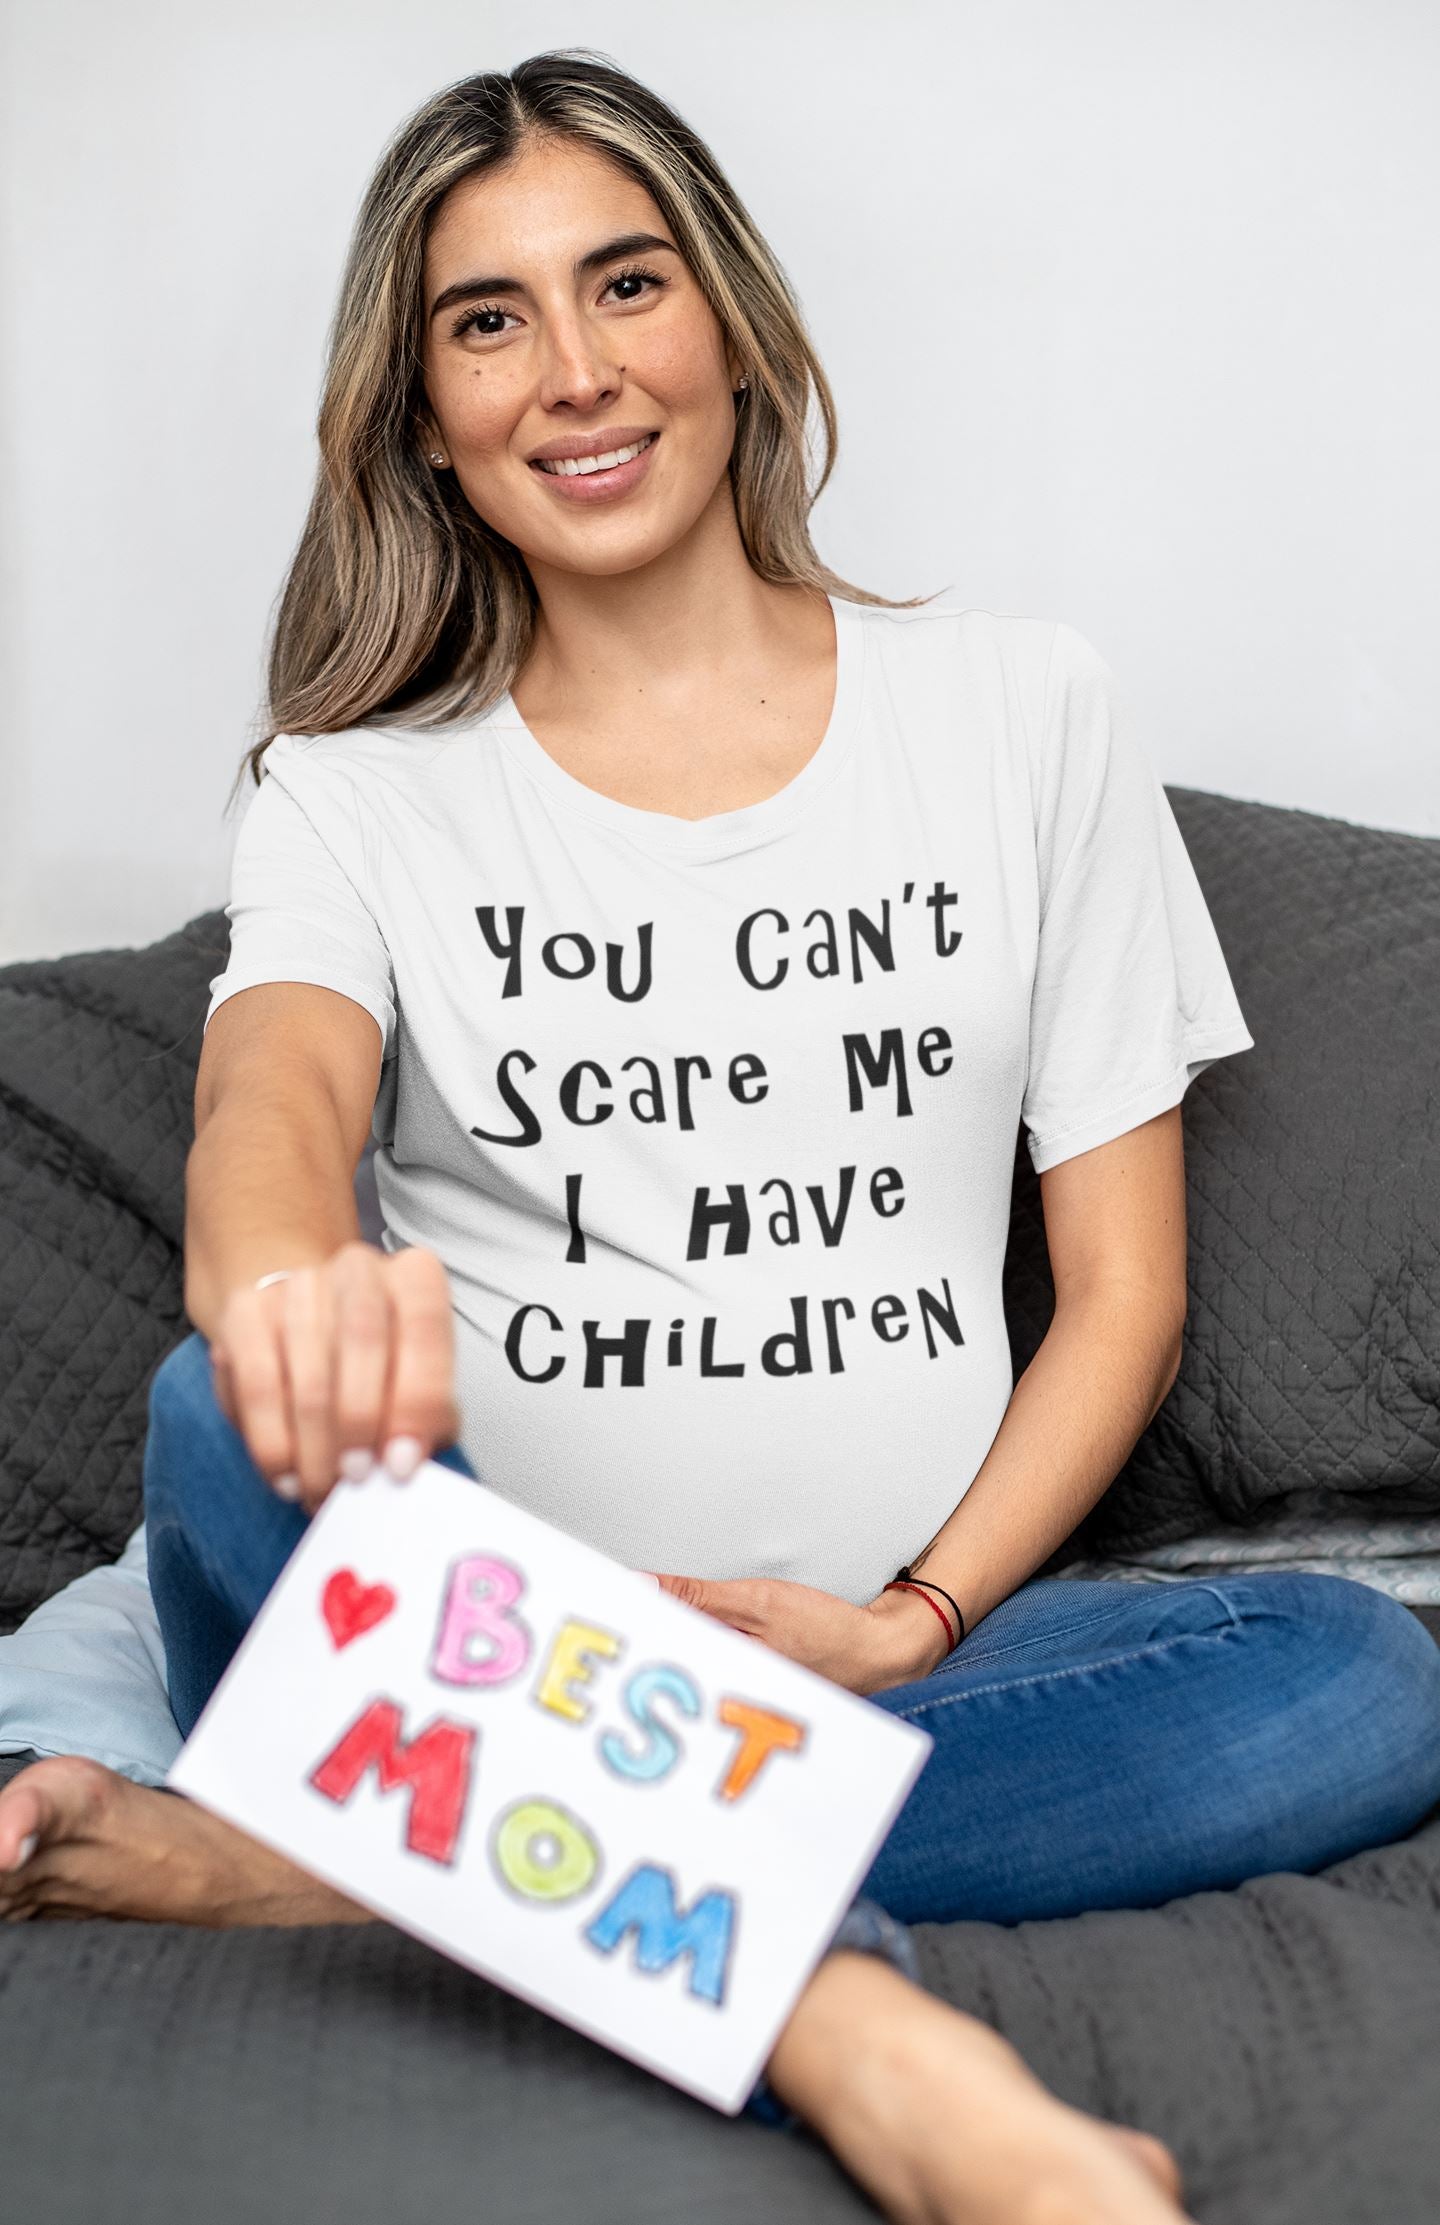 You Can't Scare Me I Have Children Funny White T Shirt for Mothers and Fathers freeshipping - Catch My Drift India